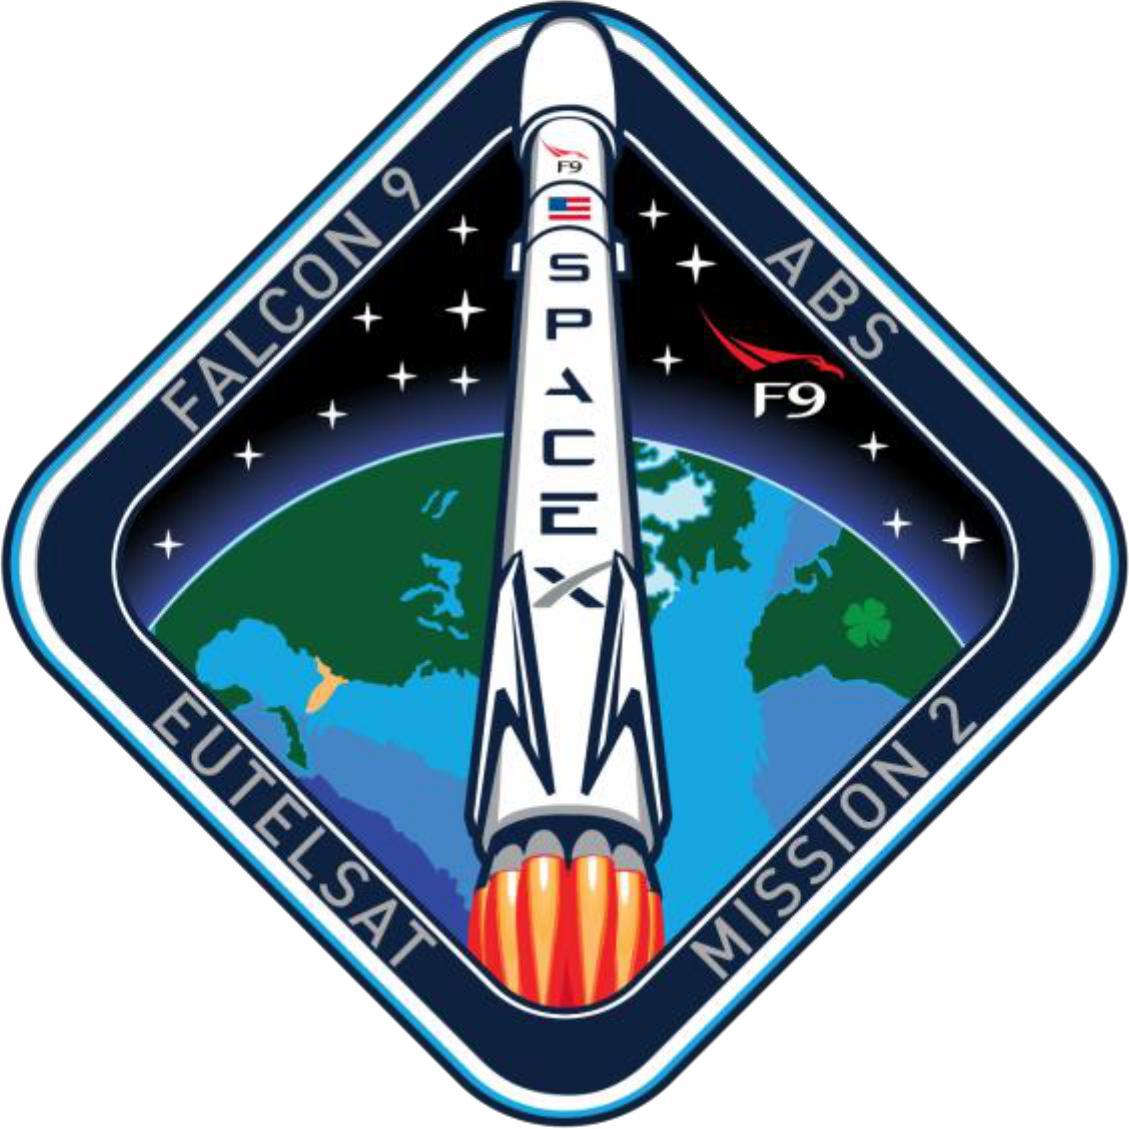 SpaceX Mission Logo - Eutelsat ABS Mission Patch : spacex